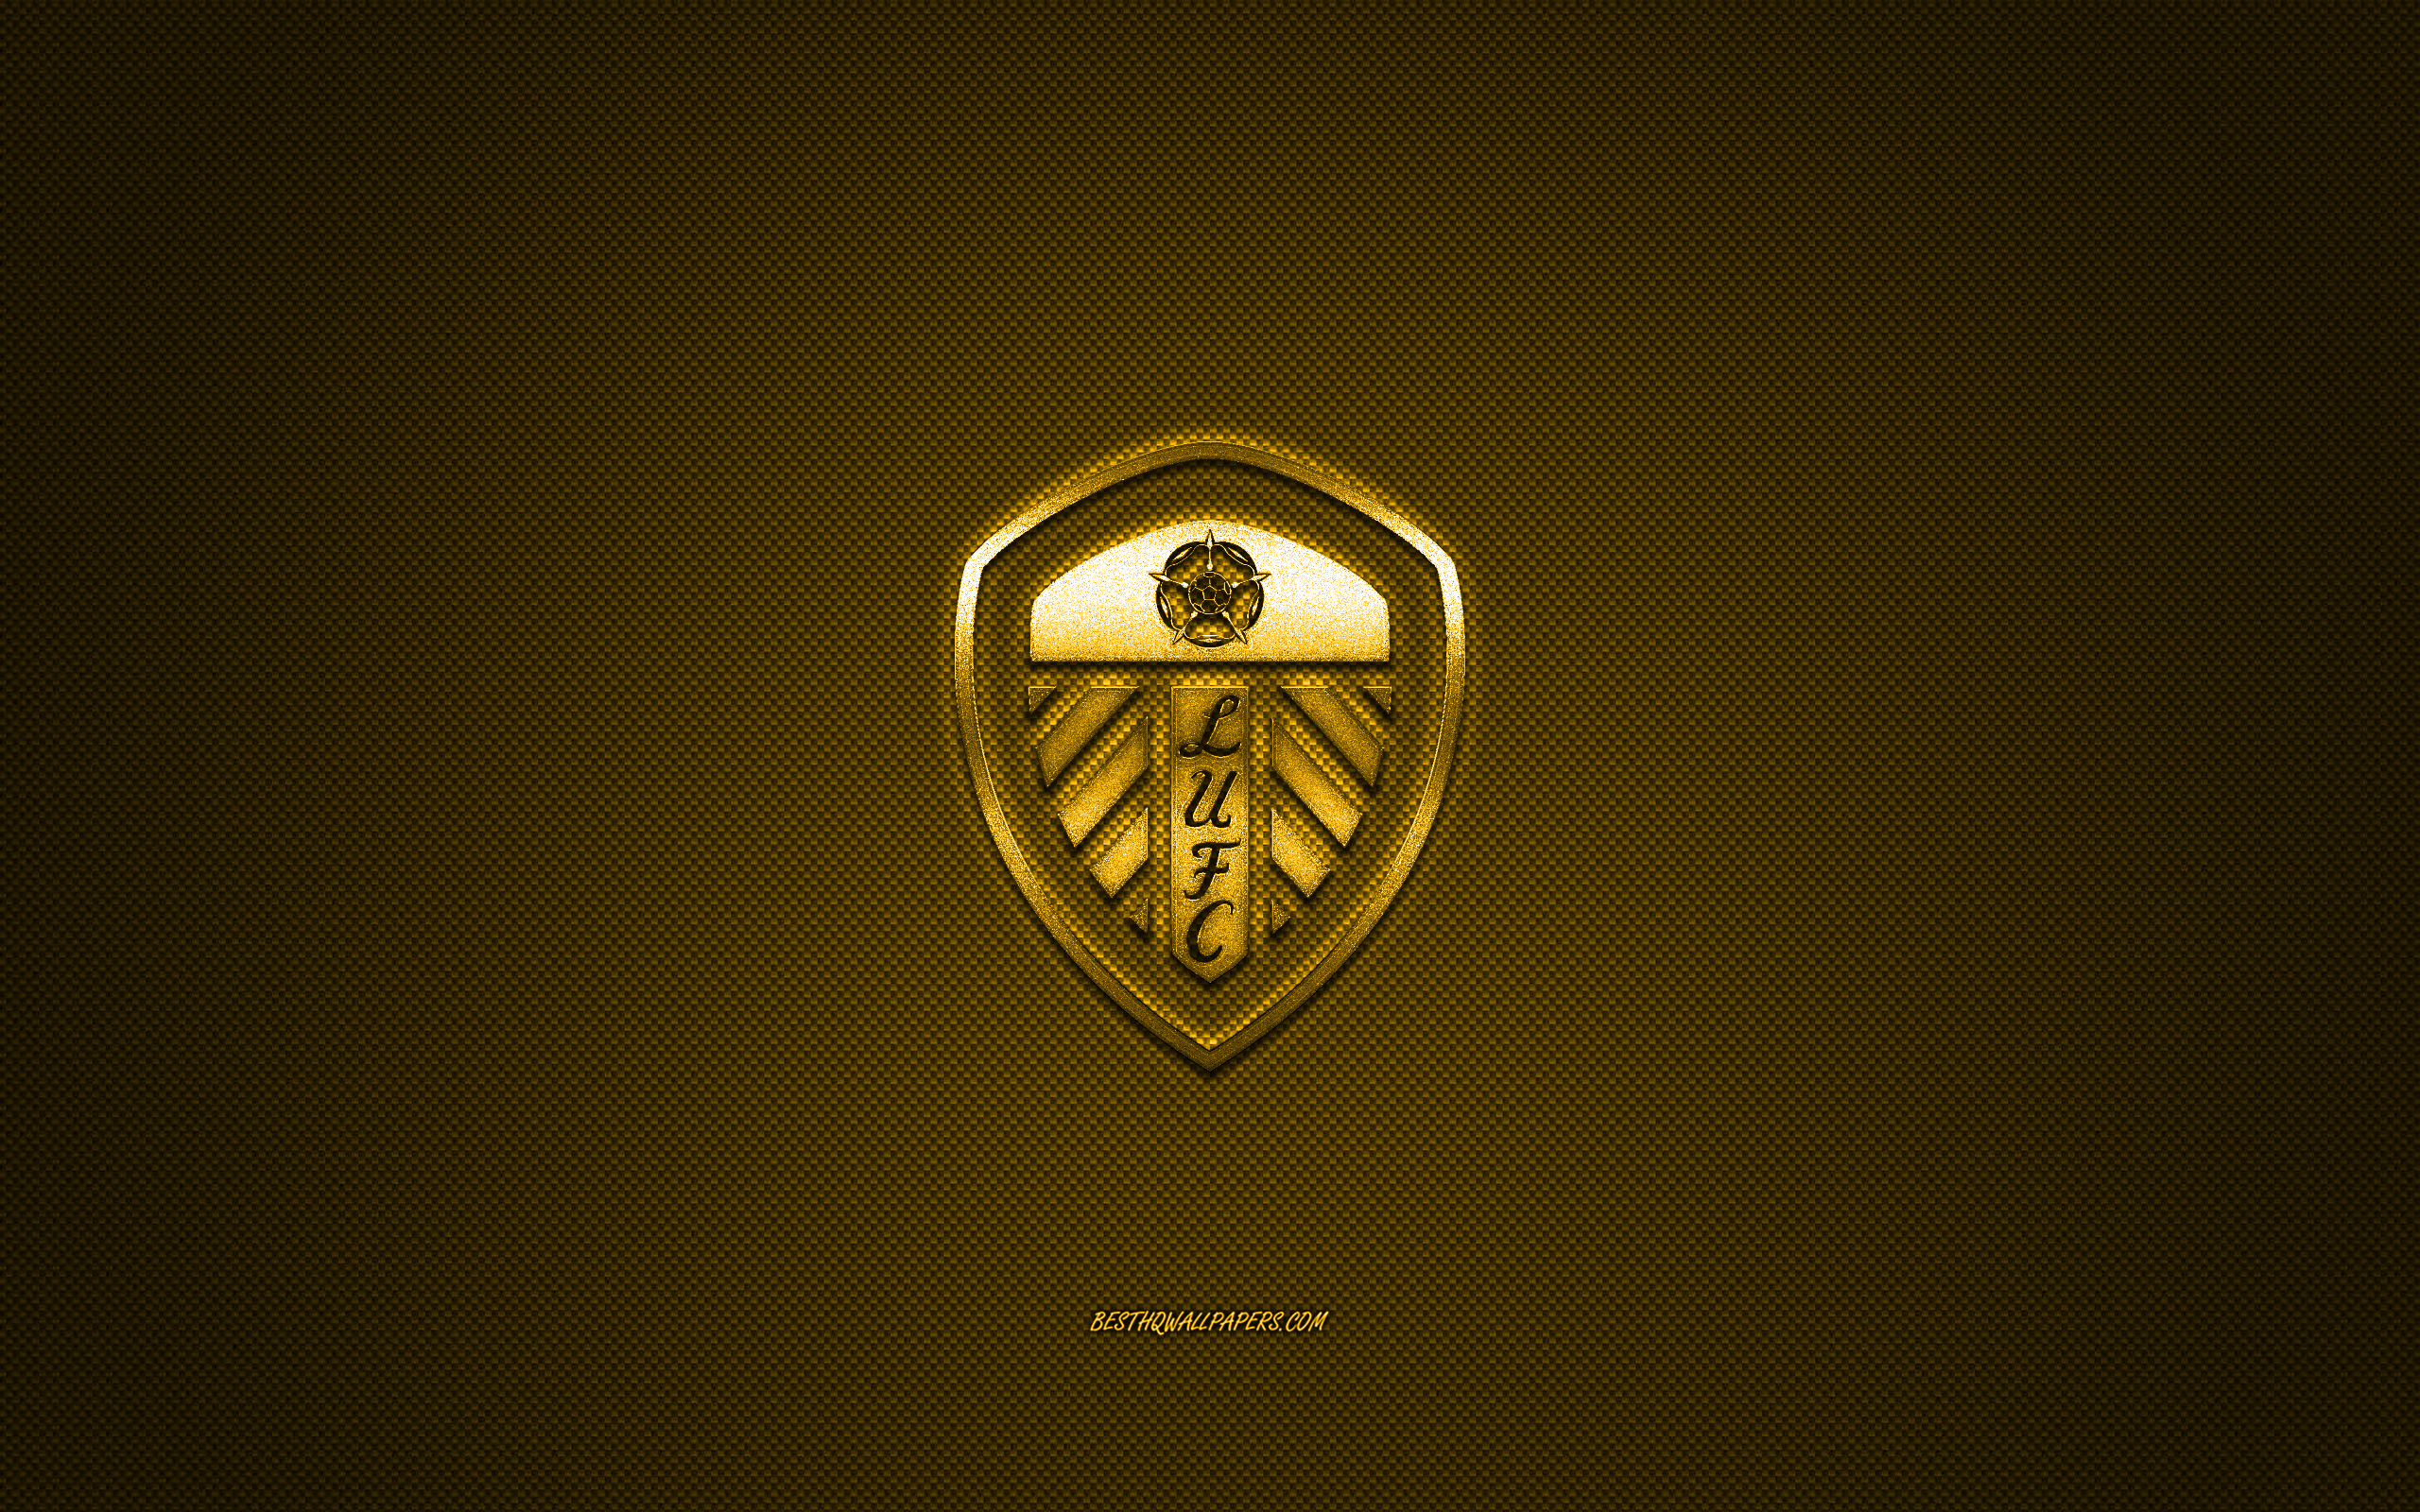 Download wallpaper Leeds United FC, English football club, EFL Championship, yellow logo, yellow carbon fiber background, football, Leeds, Leeds United FC logo for desktop with resolution 2560x1600. High Quality HD picture wallpaper